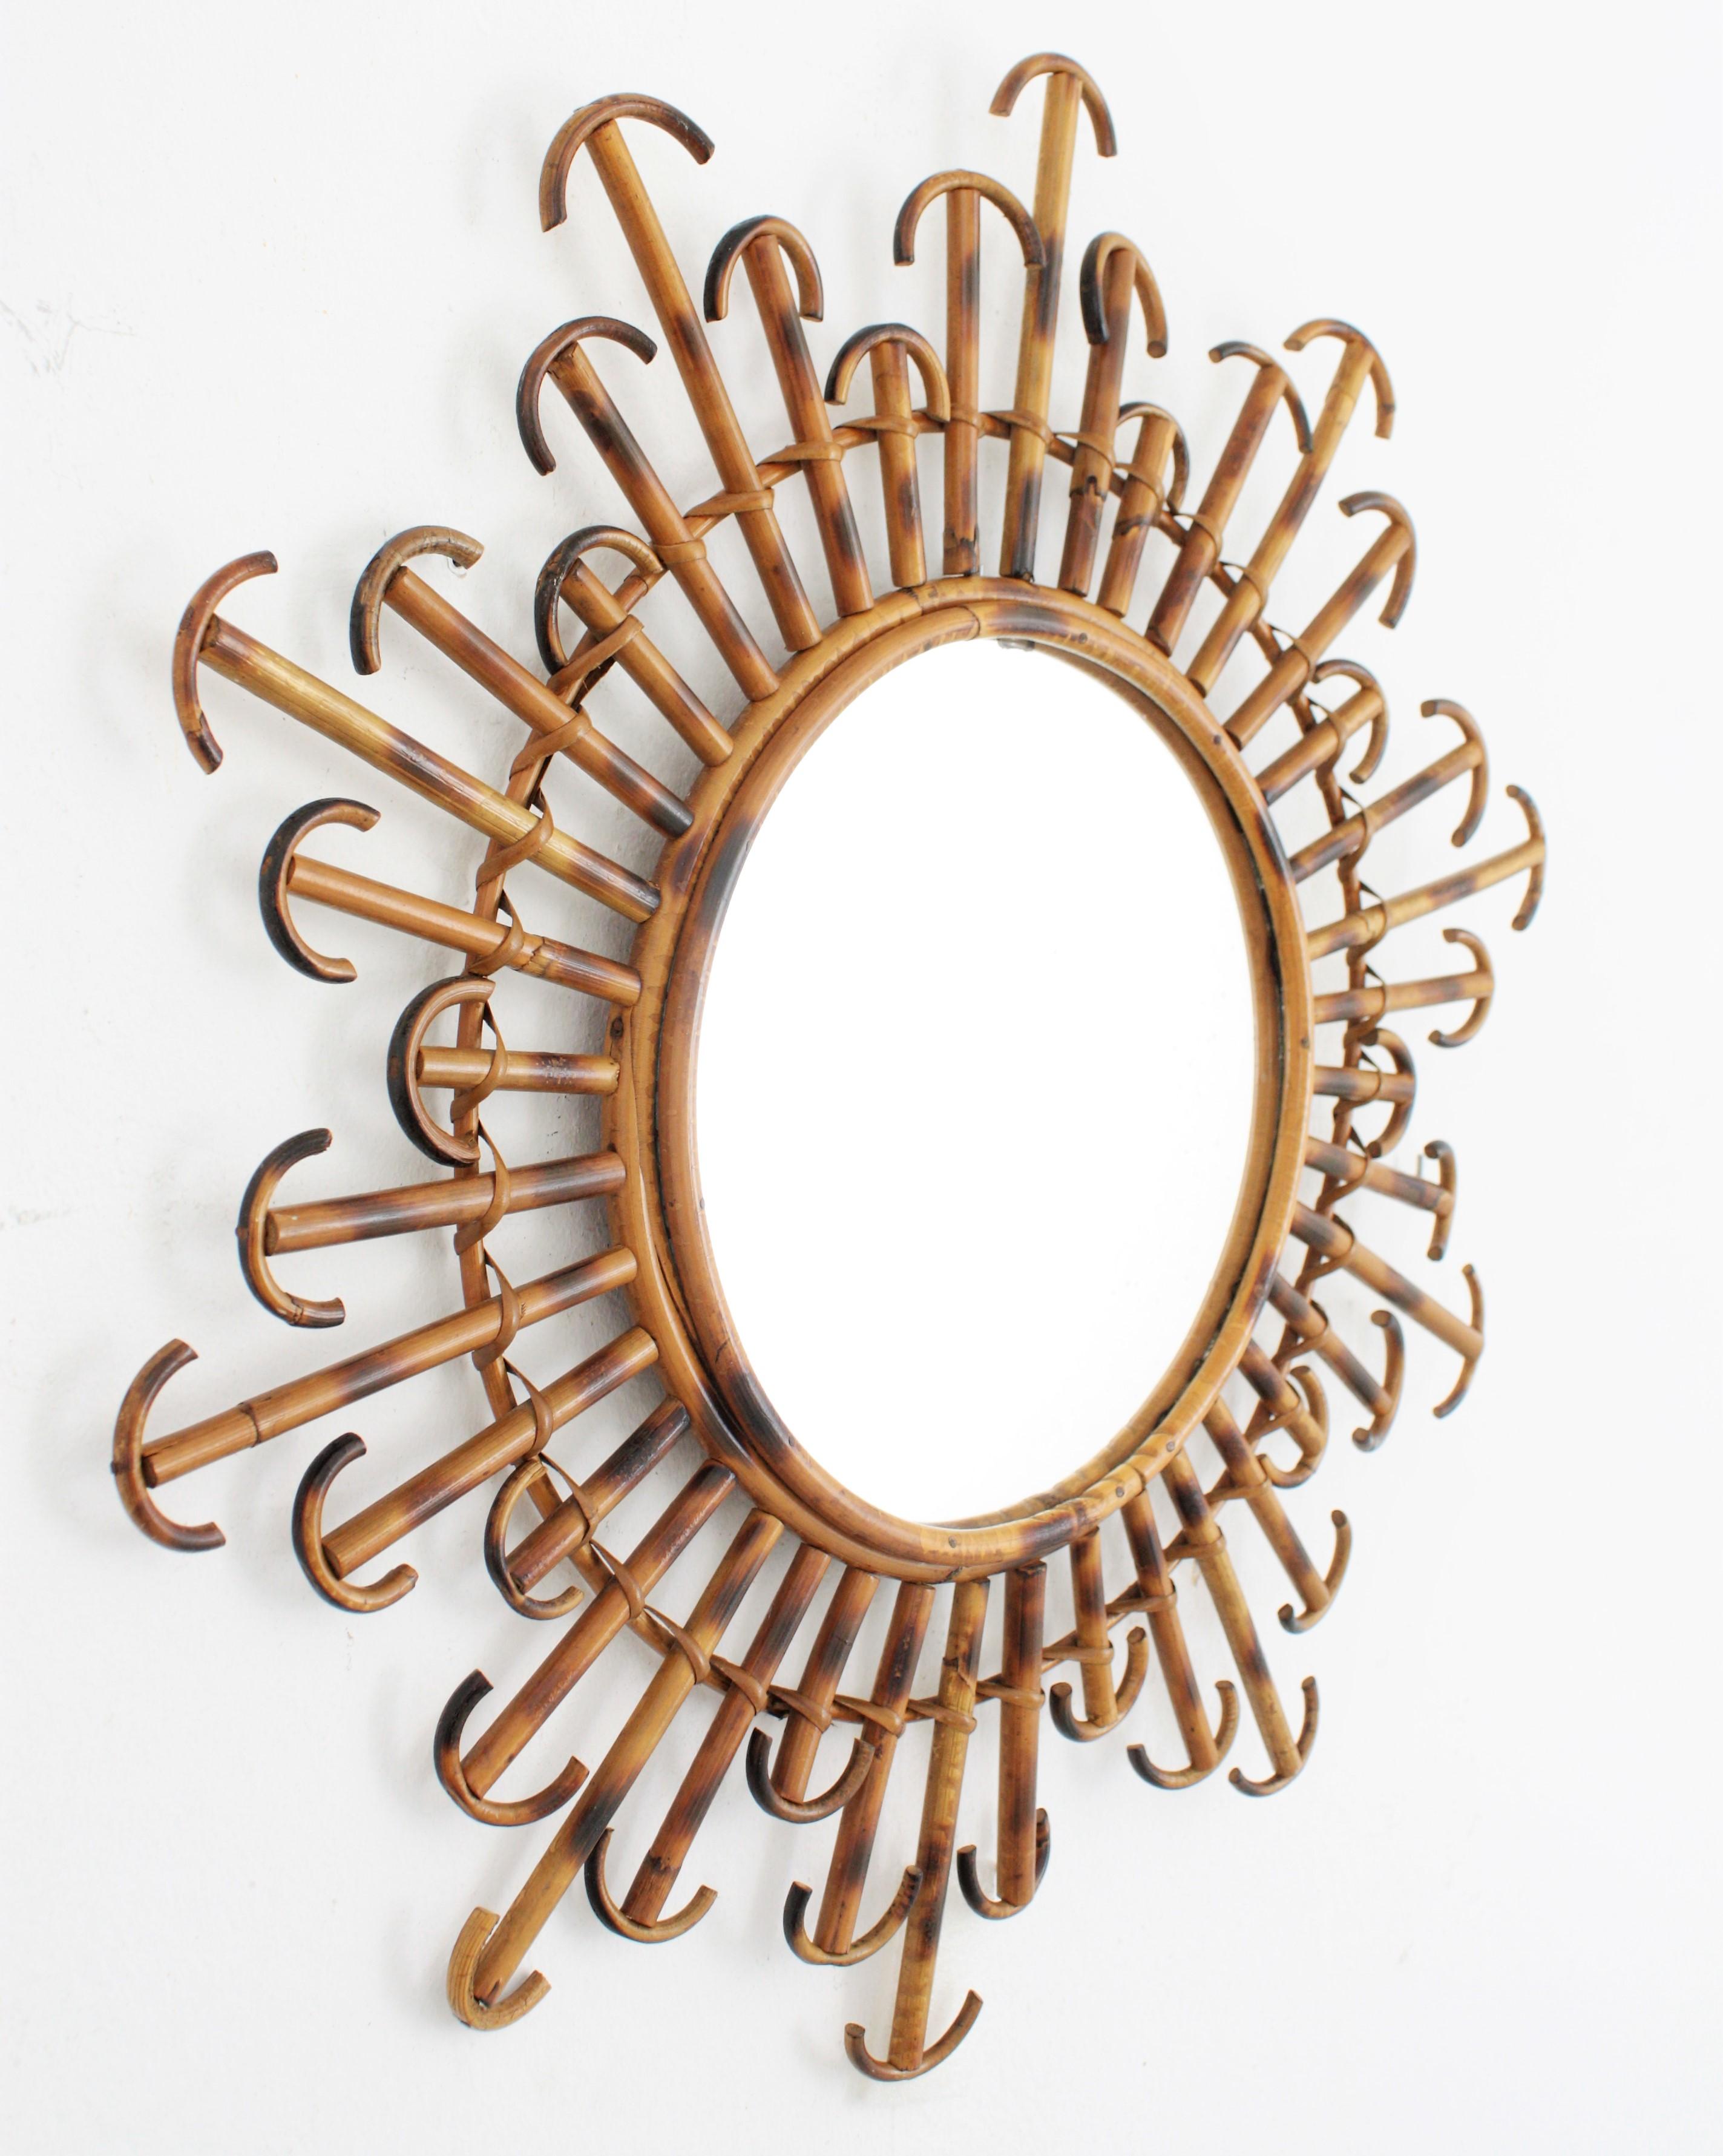 Hand-Crafted French Rattan Wicker Sunburst Mirror with Curved Endings, 1950s